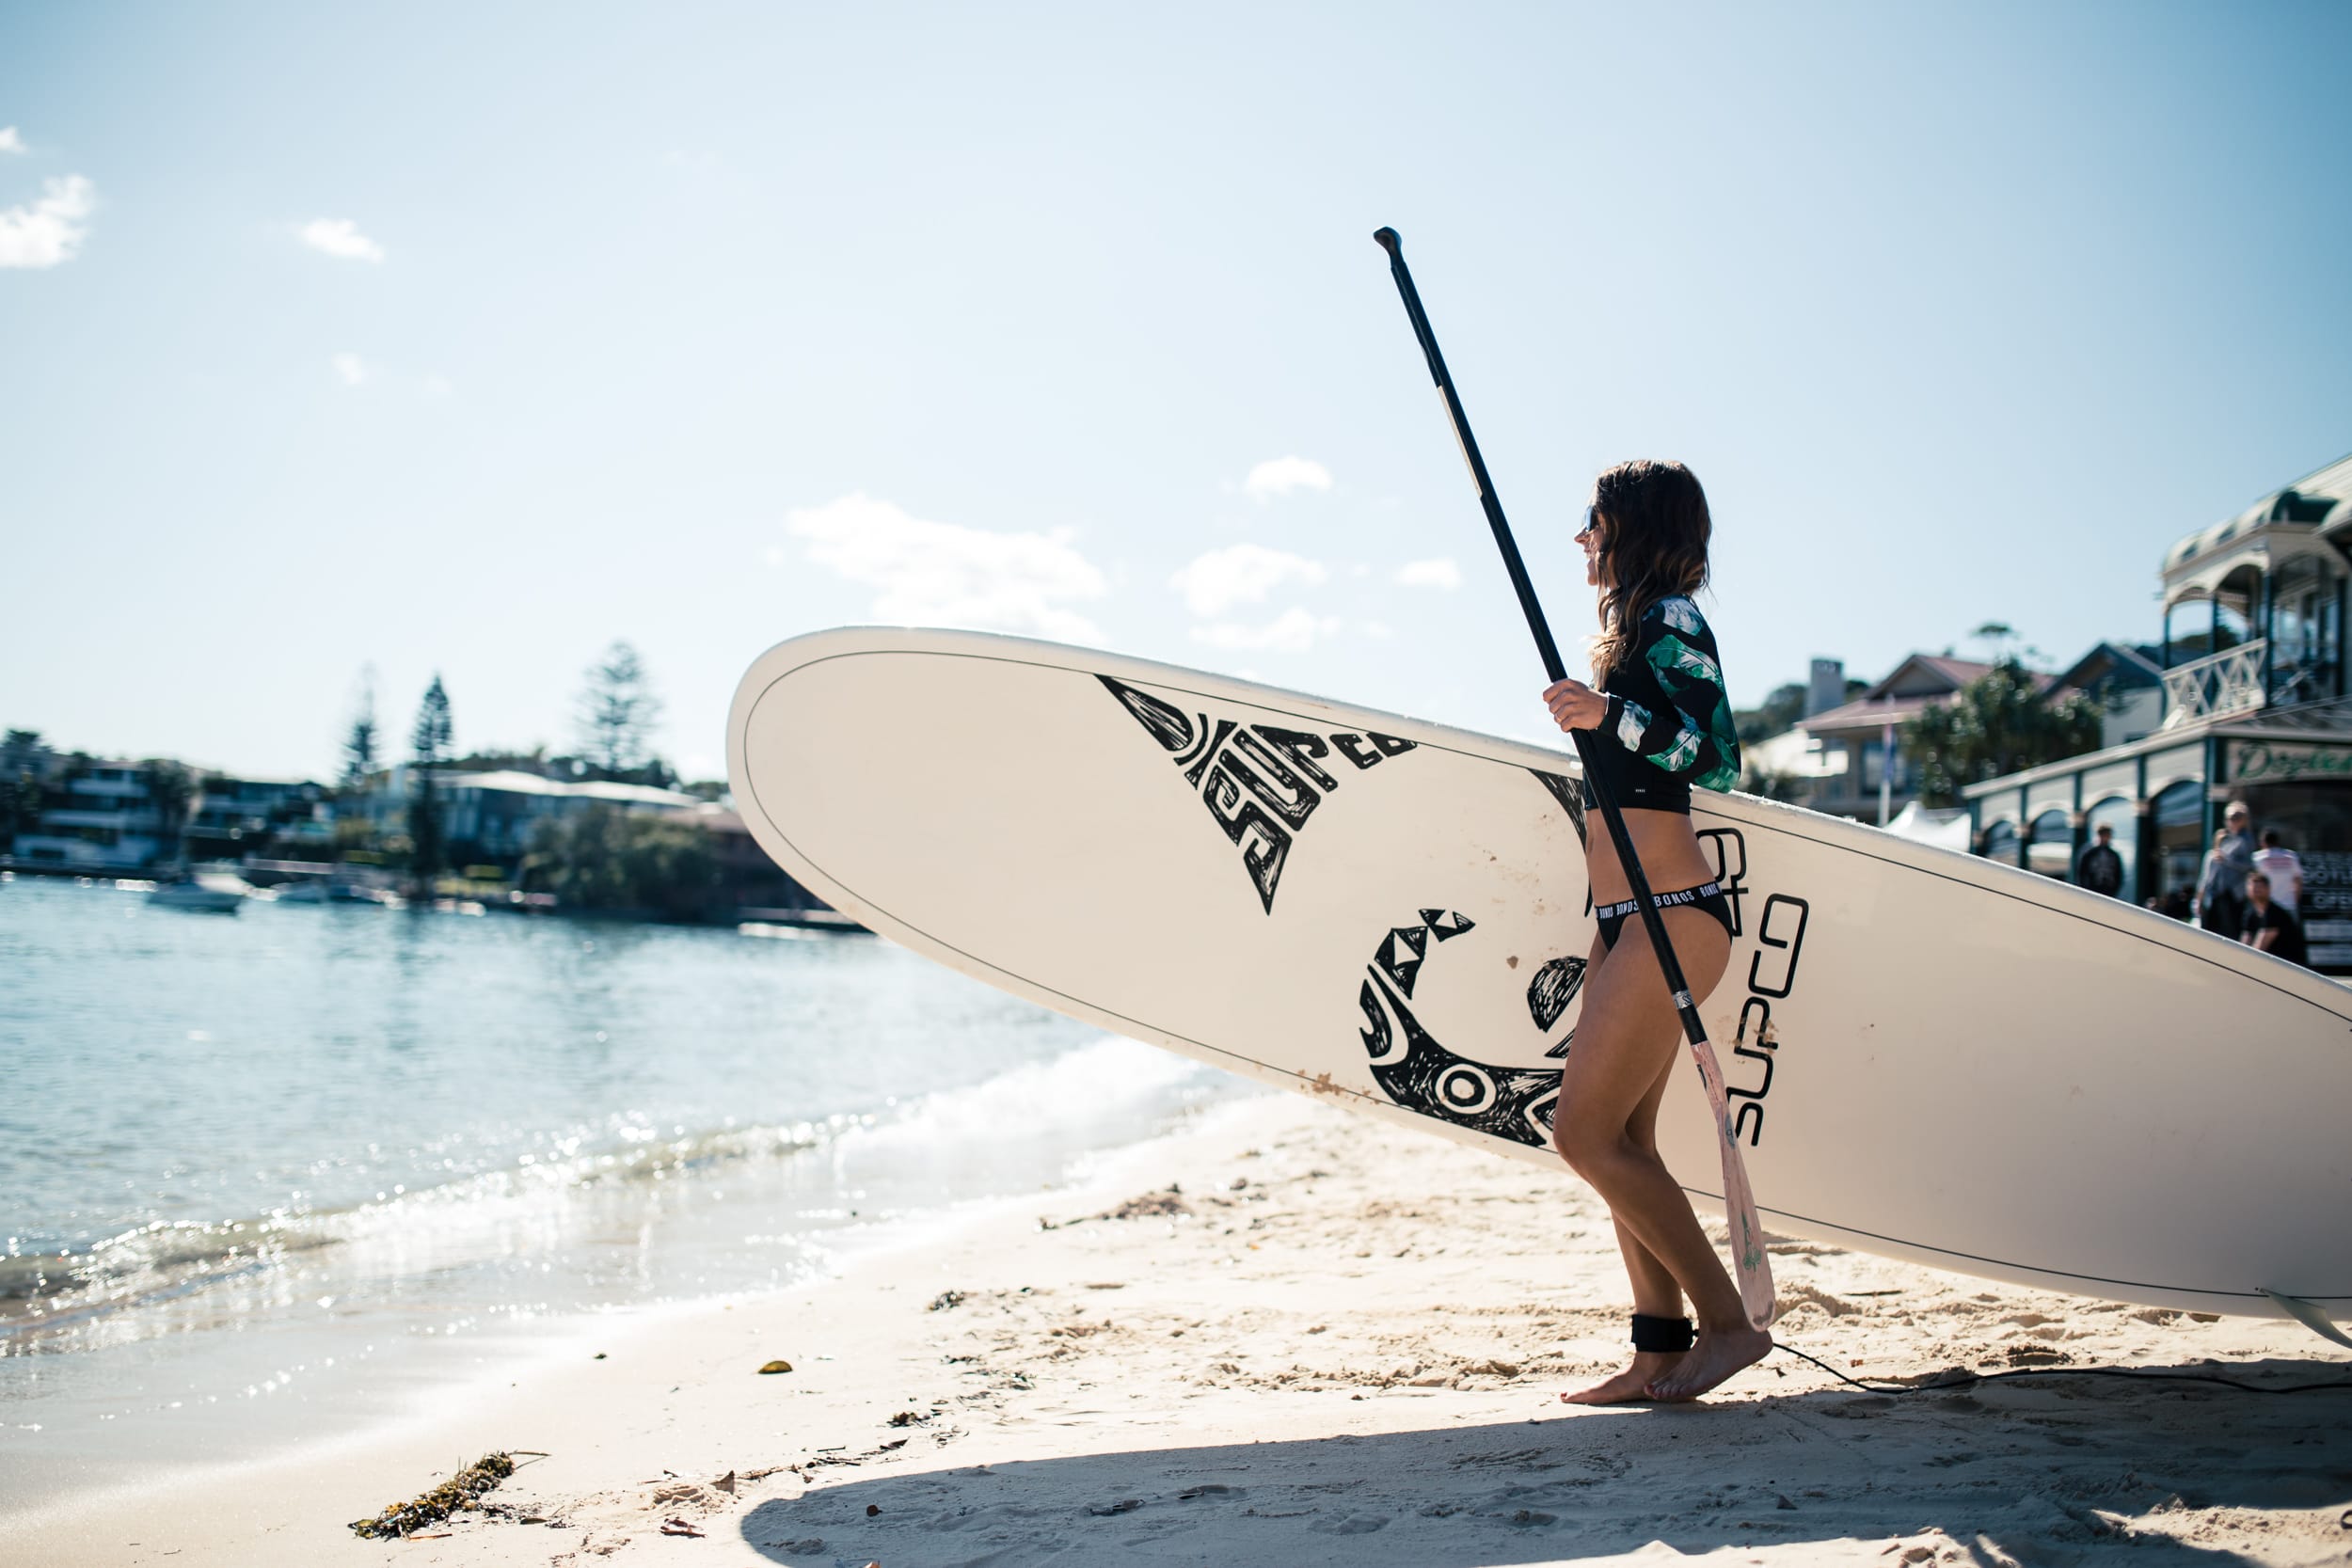 STAND UP PADDLE BOARDING WITH SOPHIE BENBOW